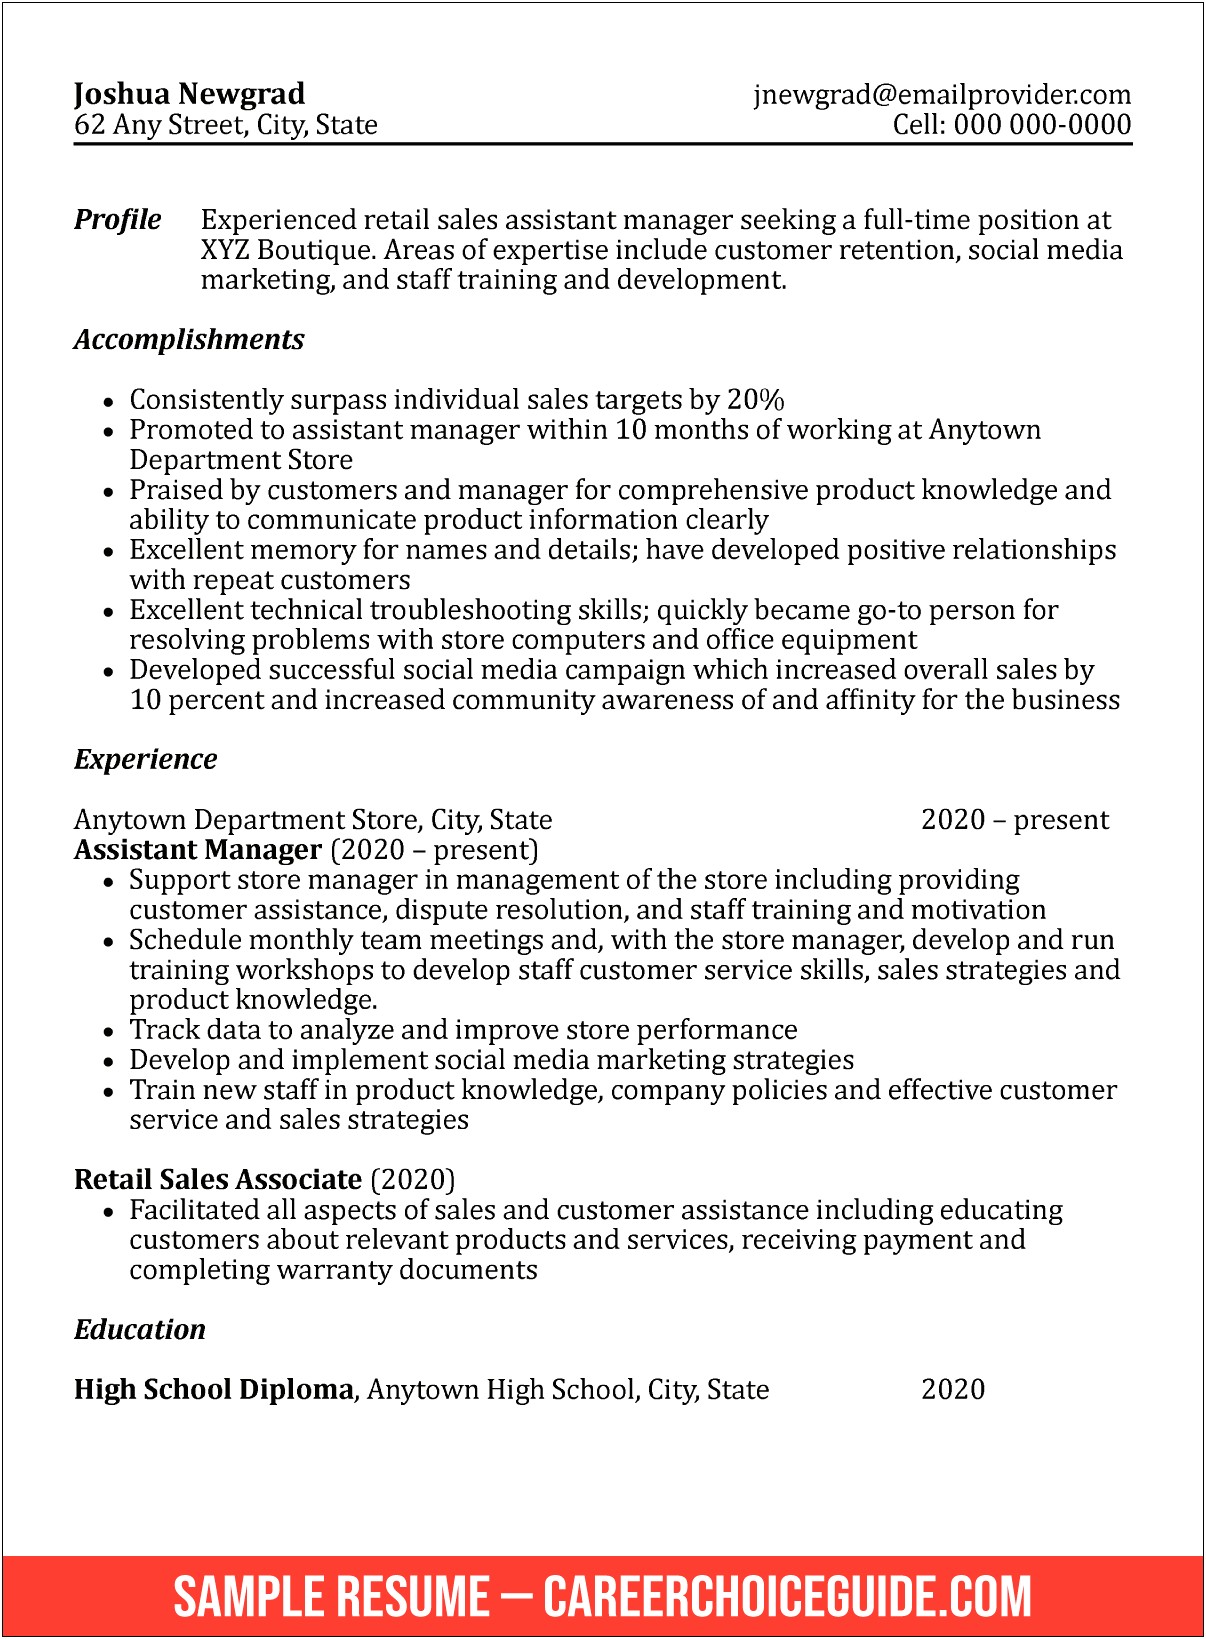 Listing High School Education On Resume Examples